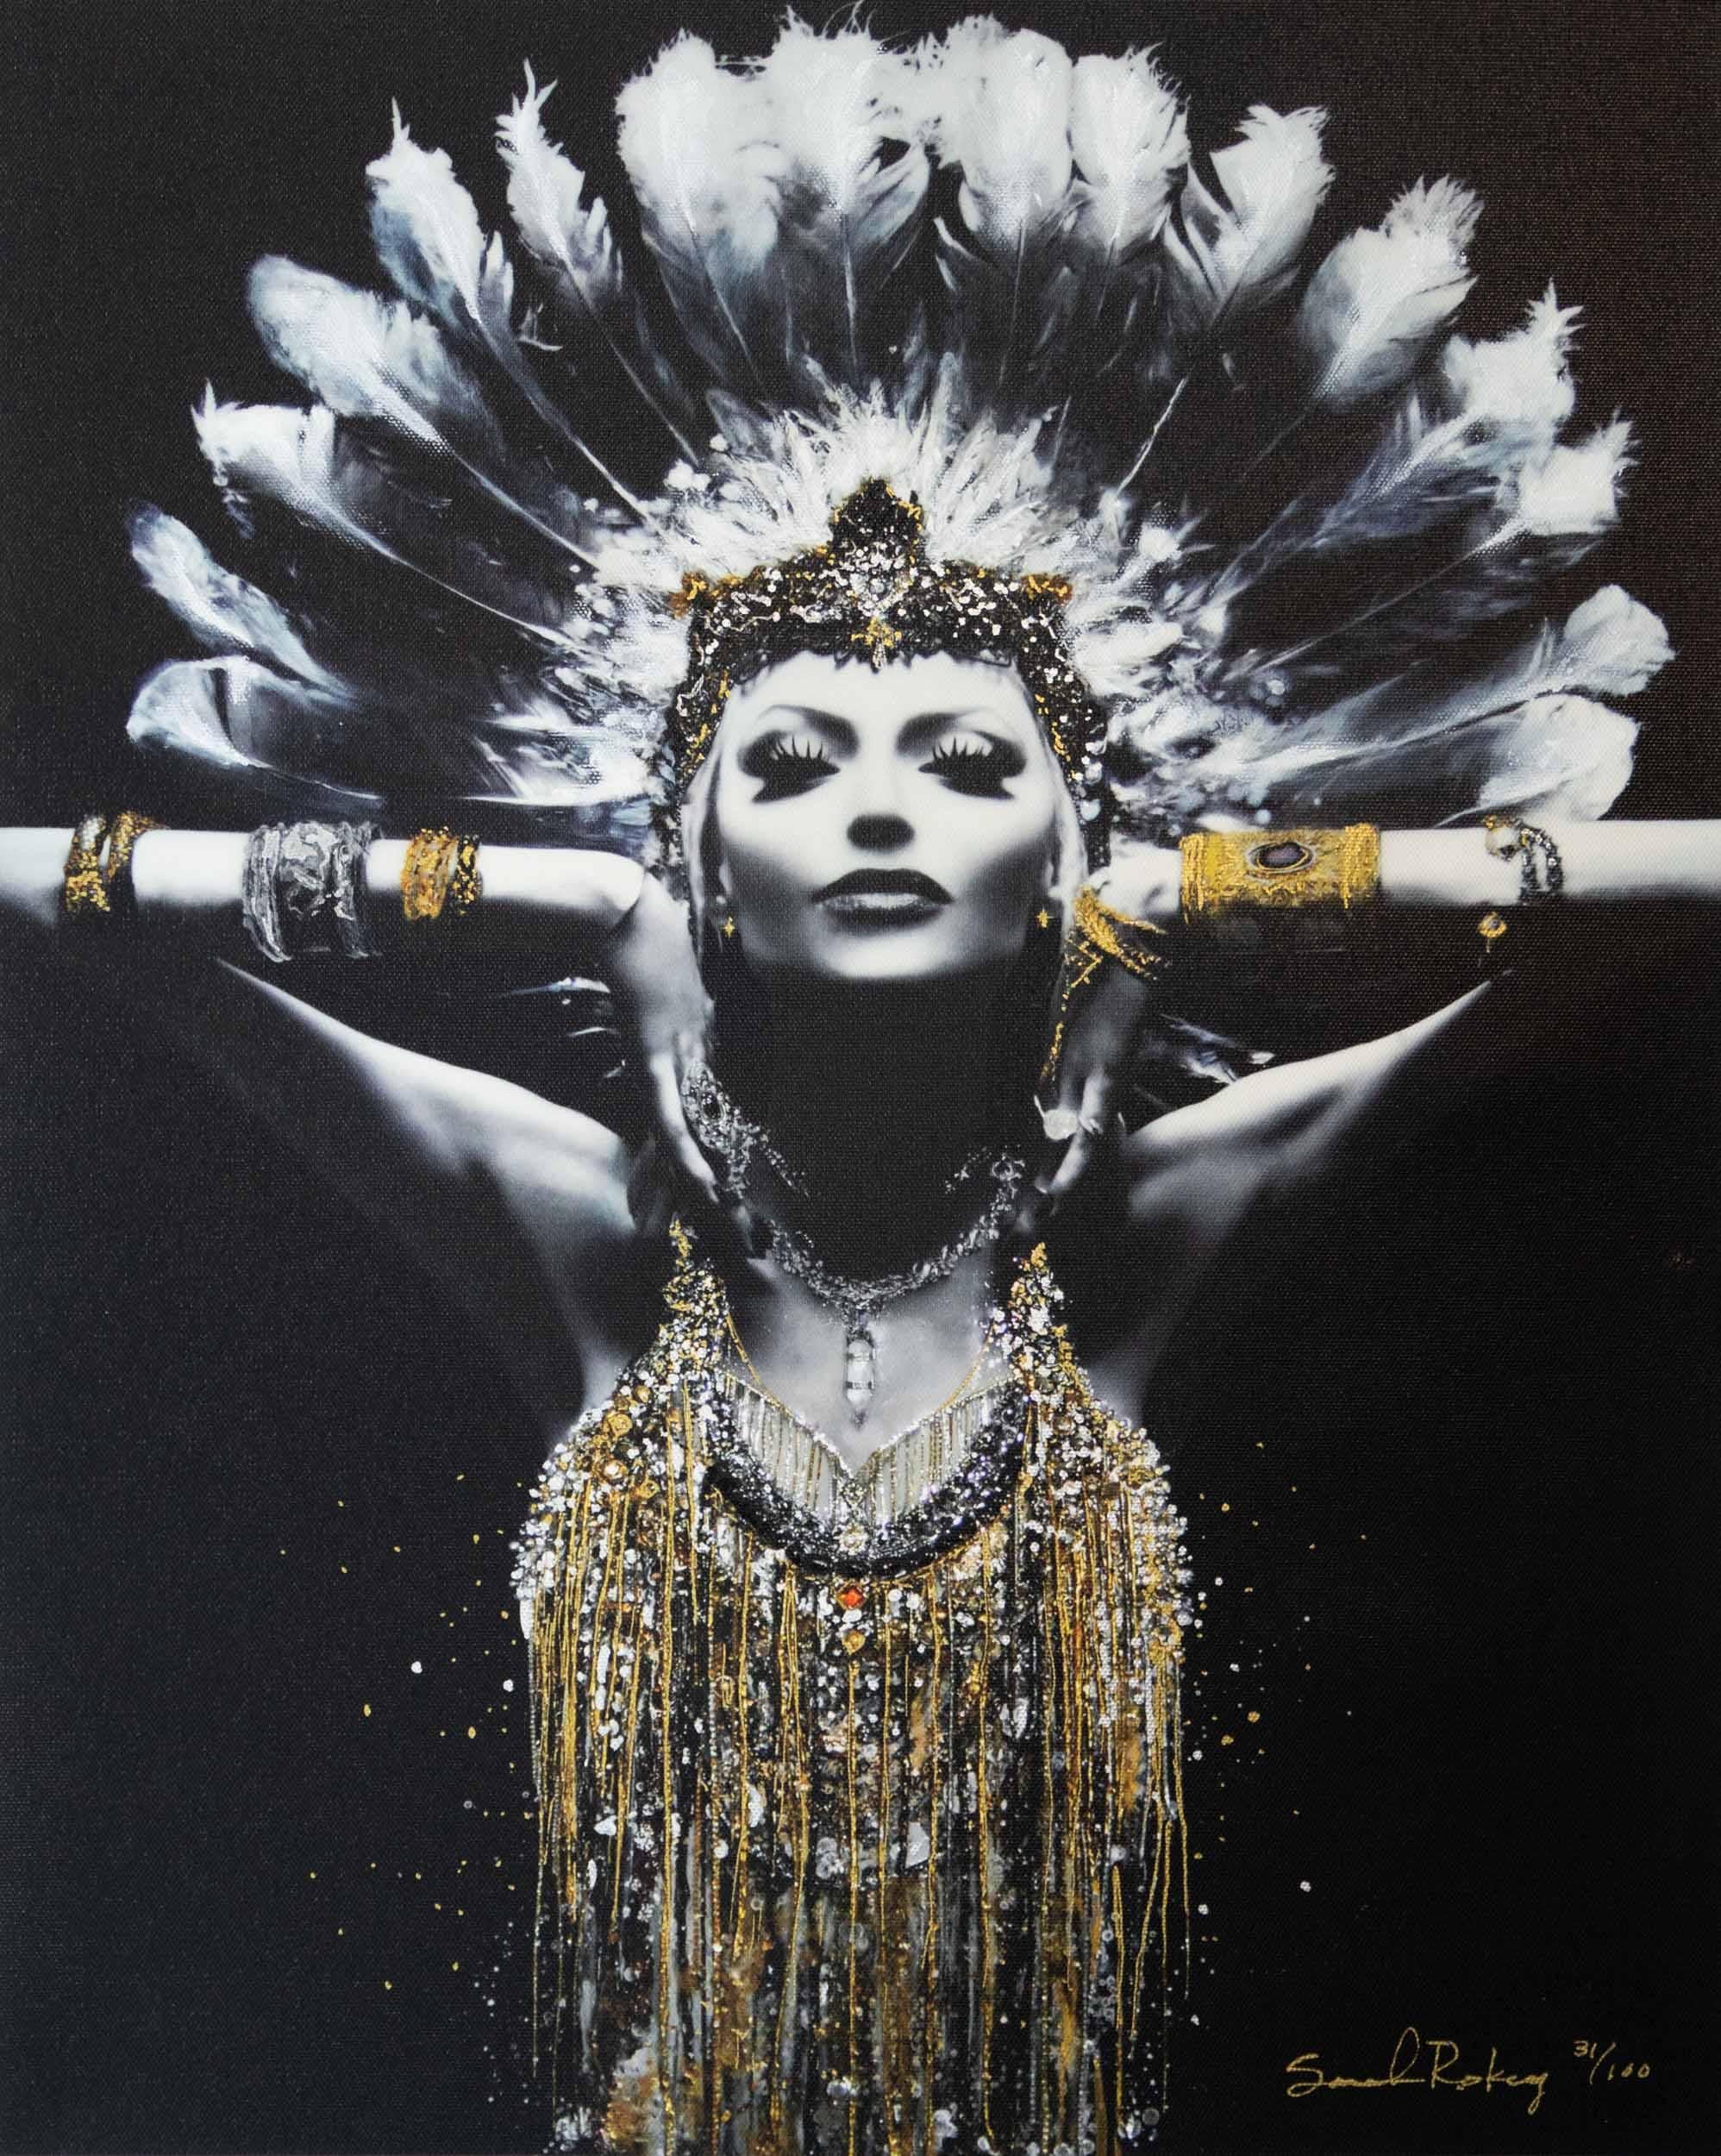 This is a hand embellished, unstretched canvas print of the original Lady Lucent of Awakening hanging at Hotel Allegro in Chicago.
16x20 inches and signed by the artist. 
Print is unstretched (not on stretcher bars) shipping flat and in lowest